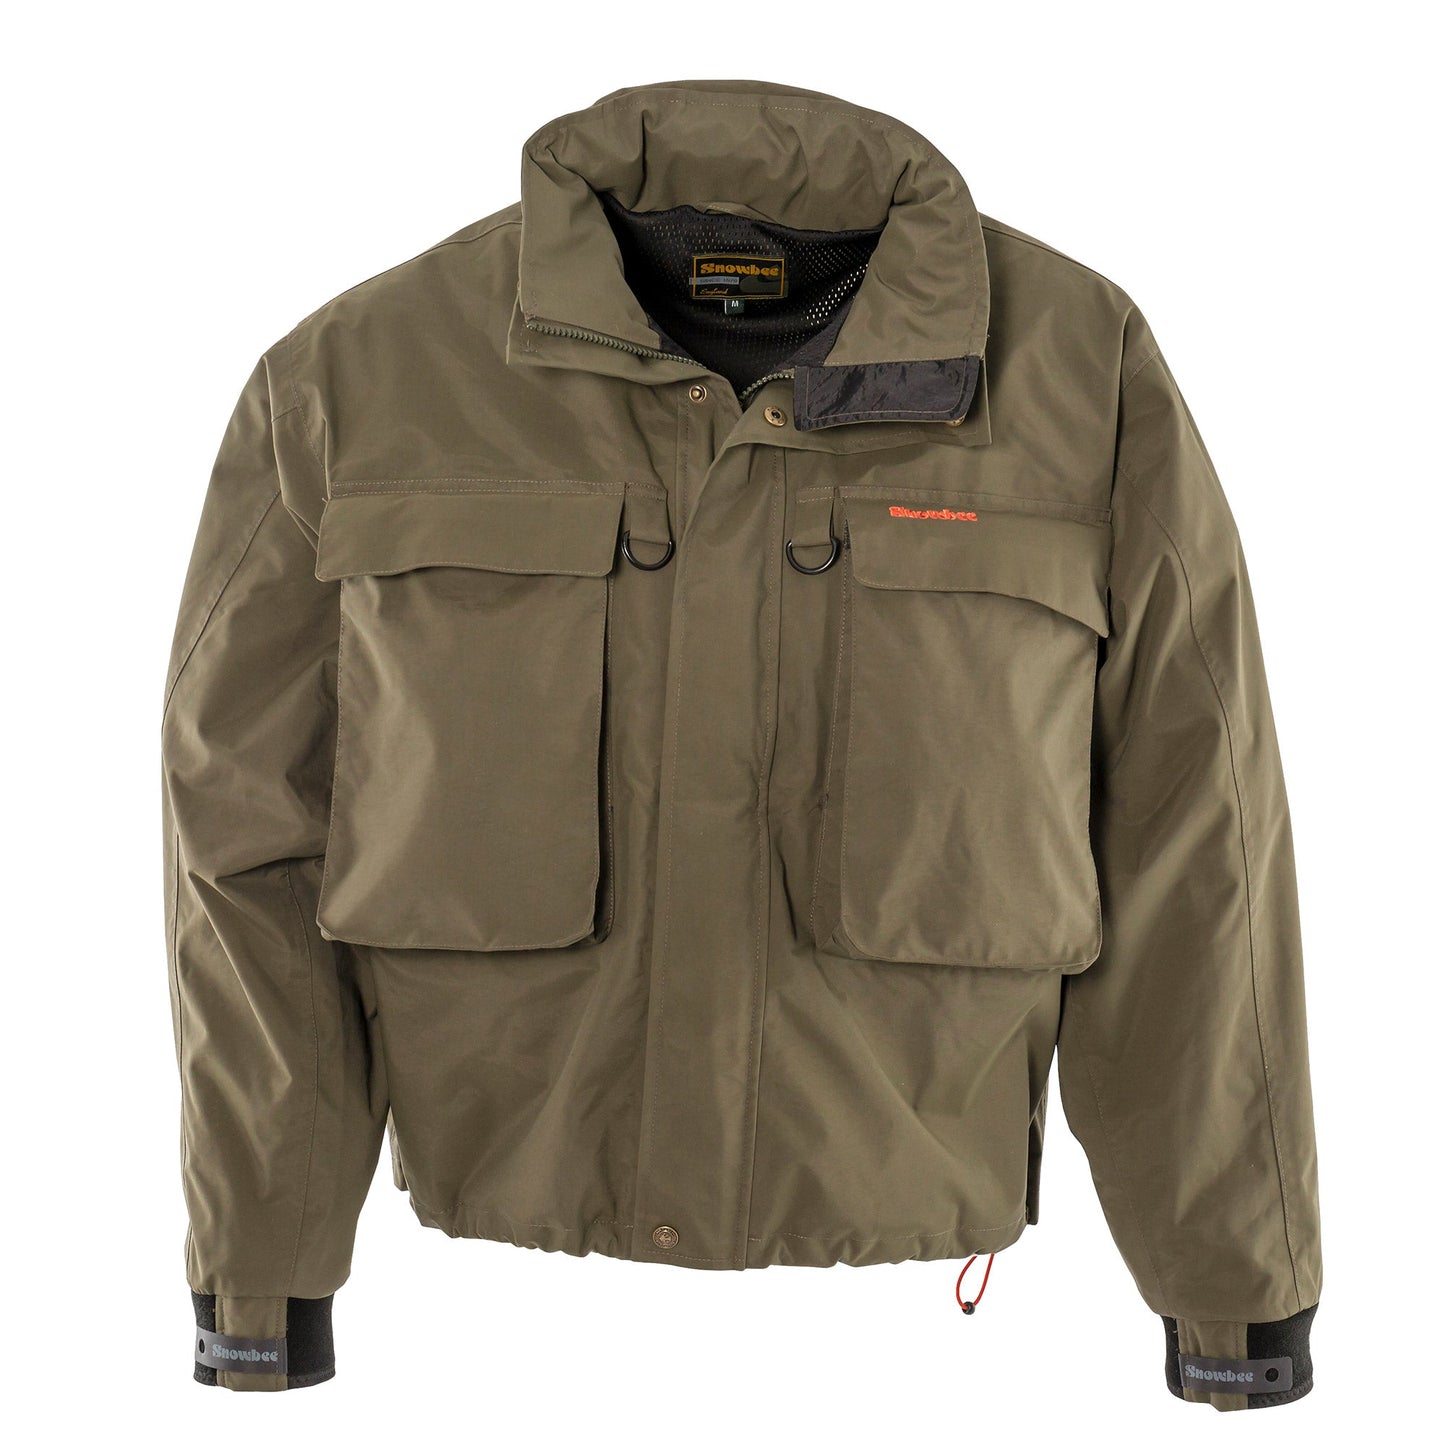 Prestige² Breathable Wading Jacket by Snowbee USA